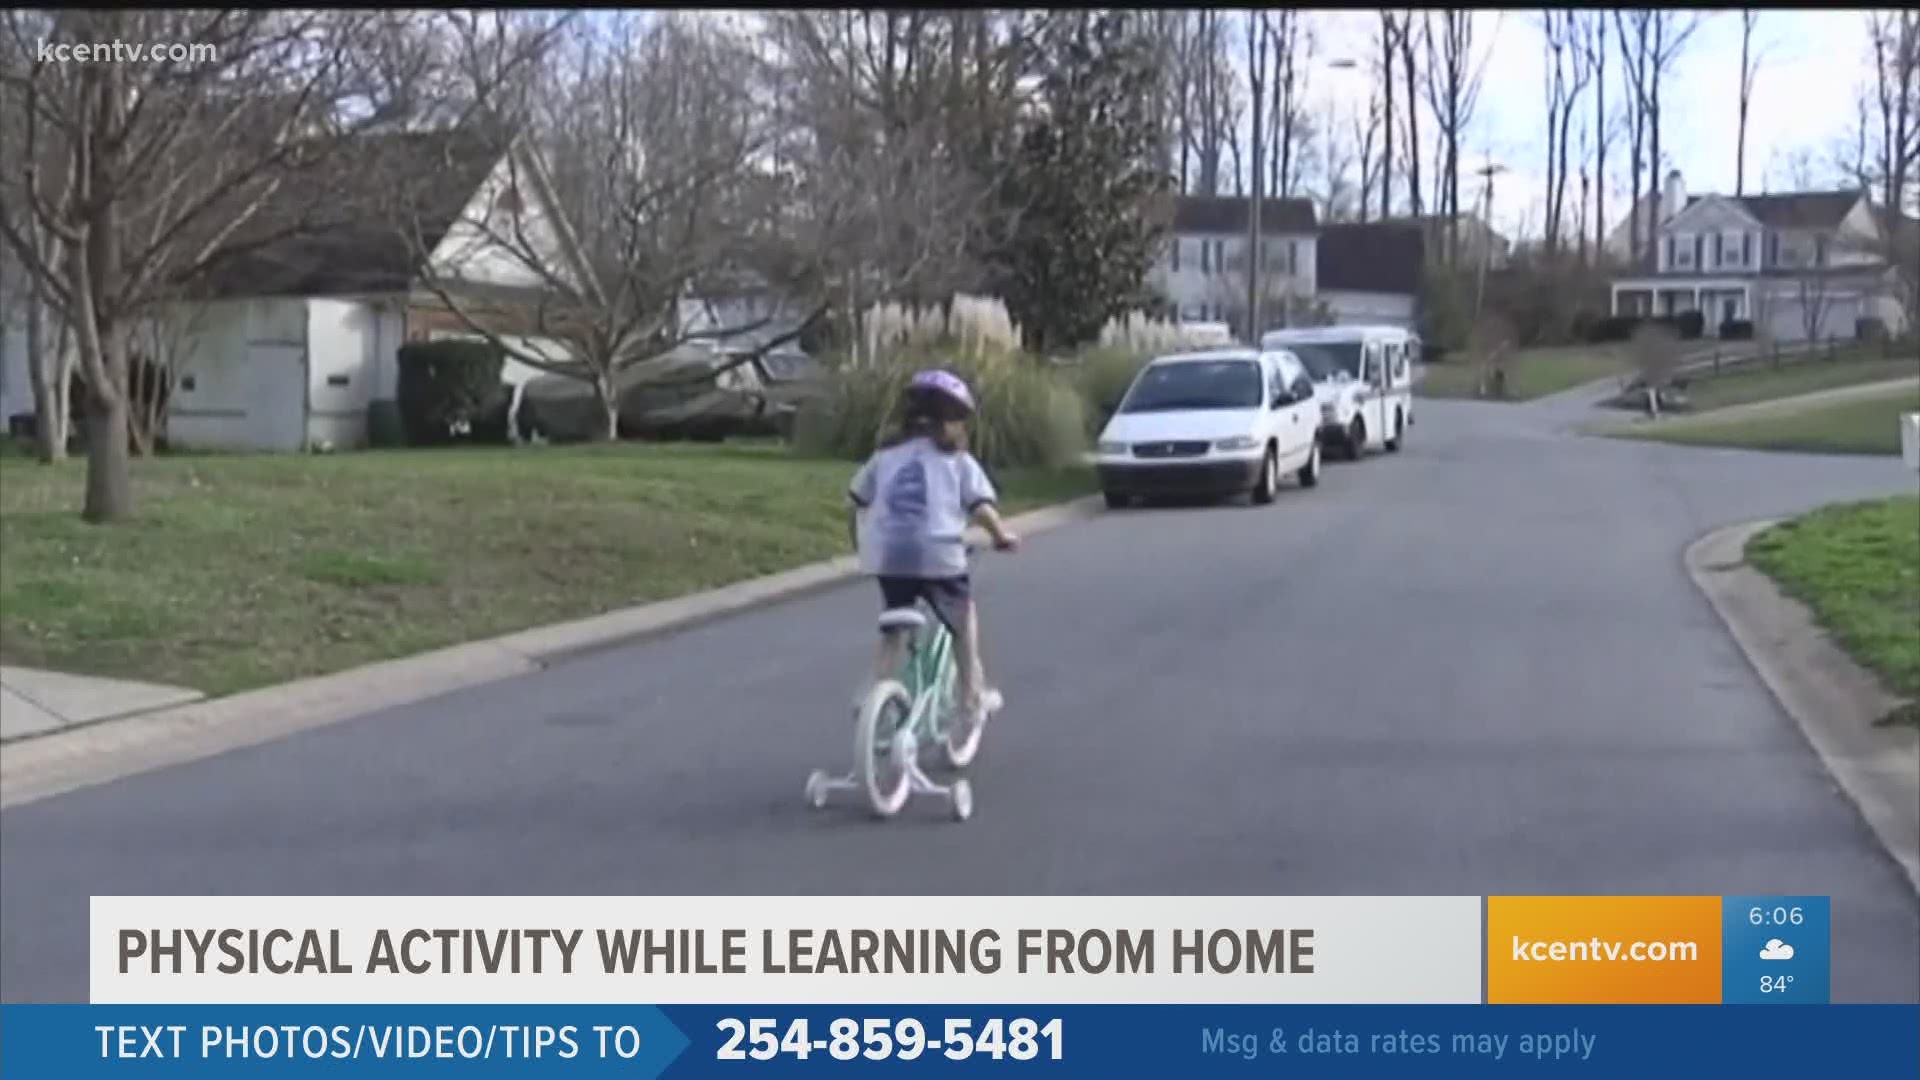 Many students are learning from home and missing out on PE classes. A local sports doctor has tips on how to stay active this school year.